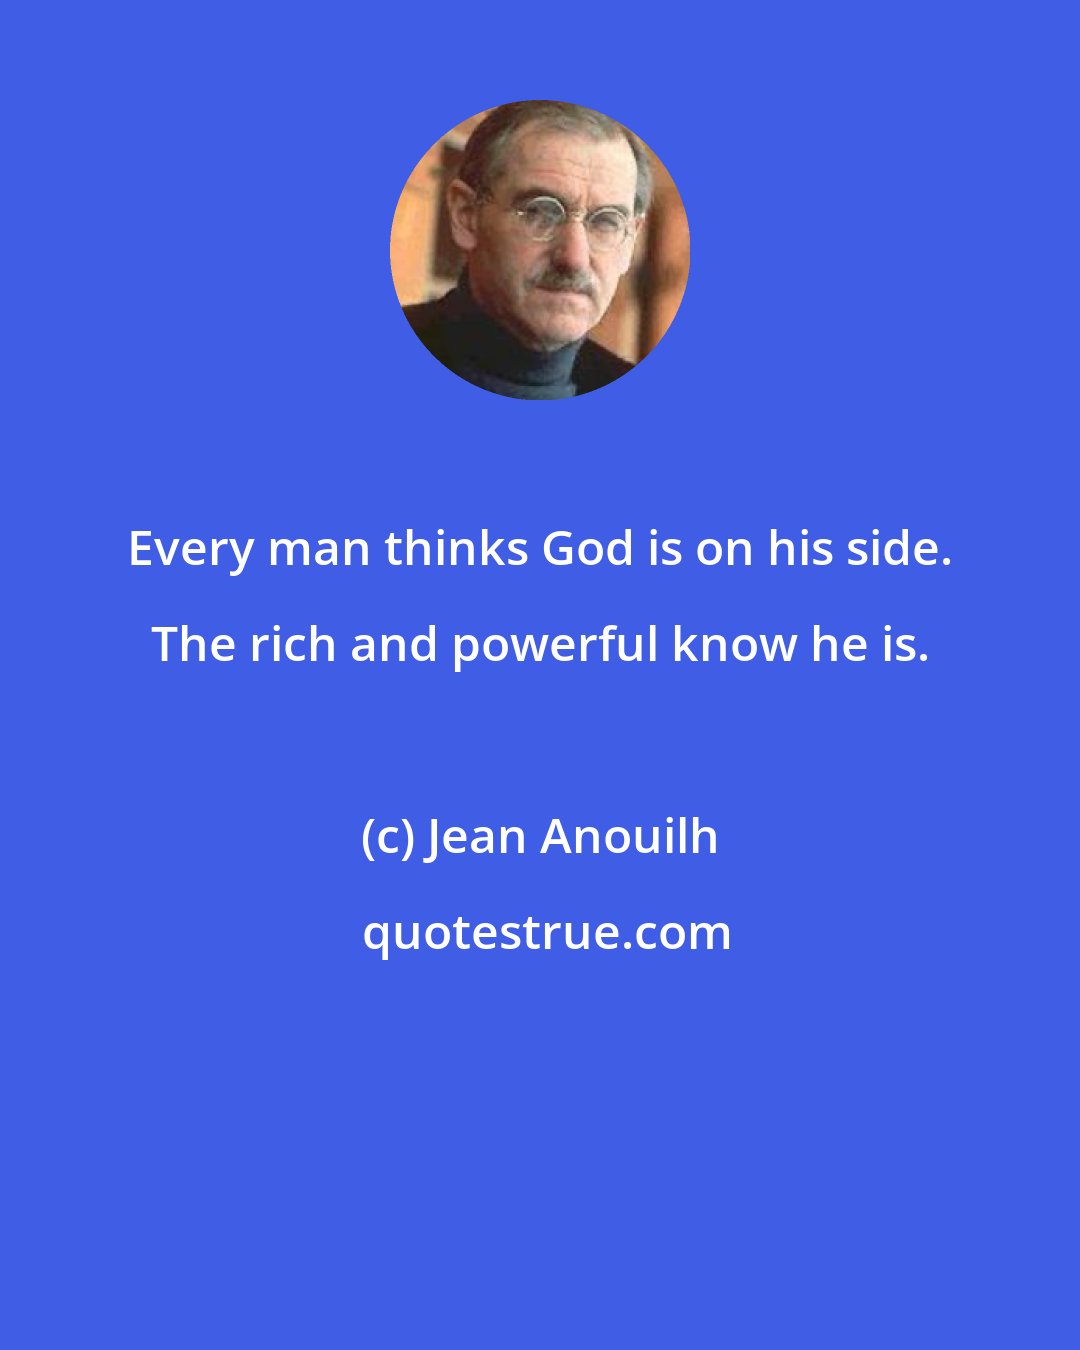 Jean Anouilh: Every man thinks God is on his side. The rich and powerful know he is.